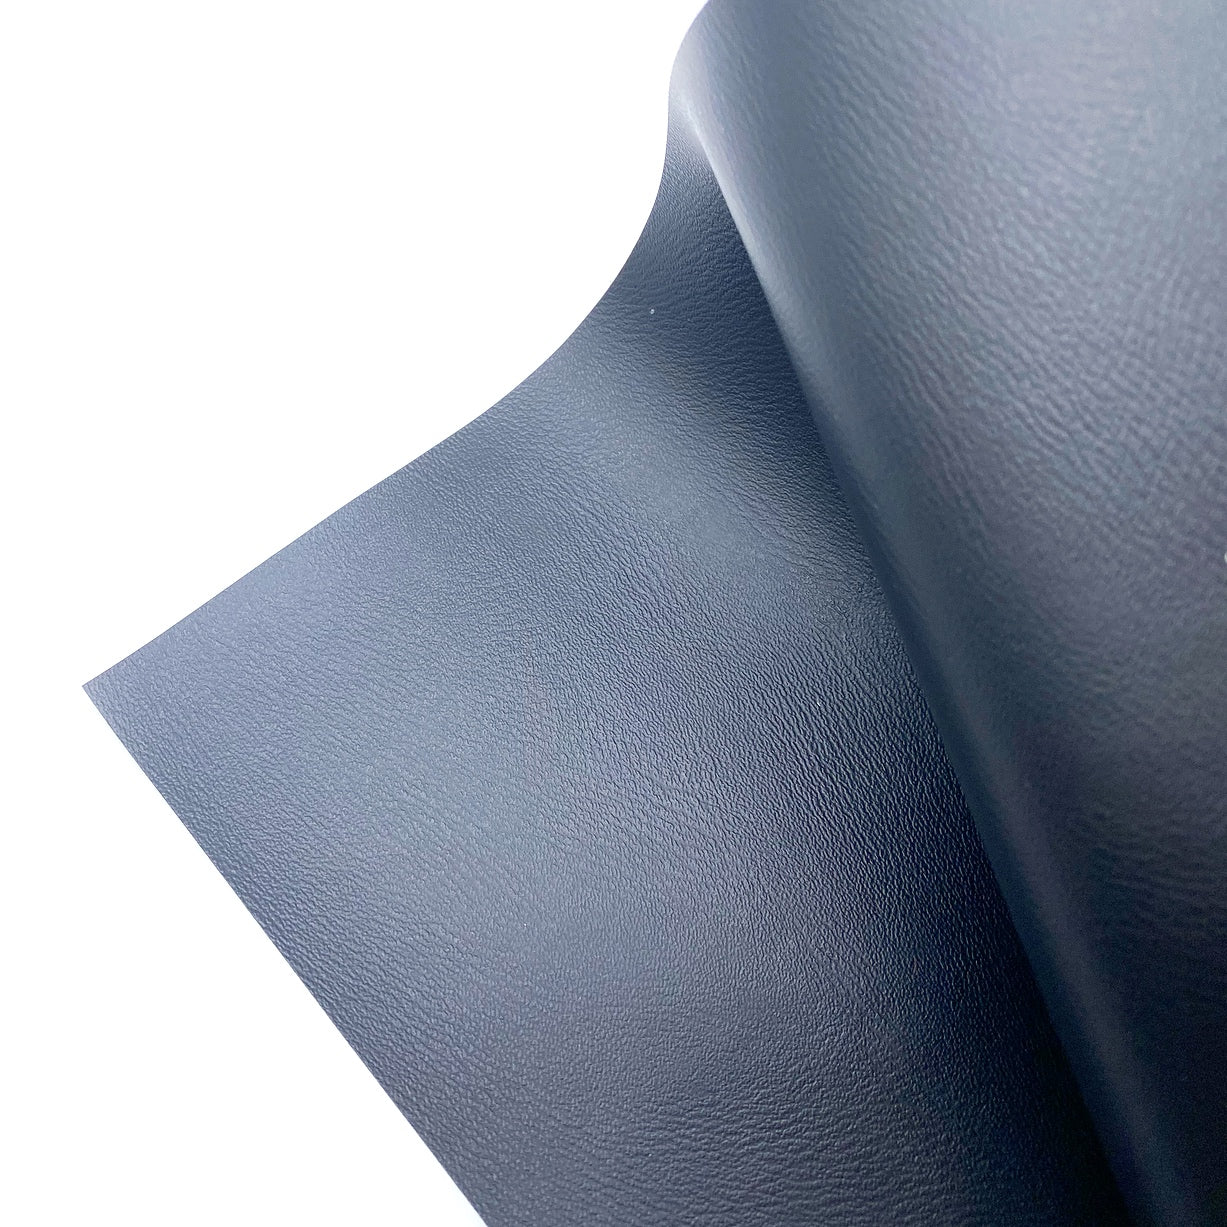 Black Widow Premium Faux Leather Fabric Sheets